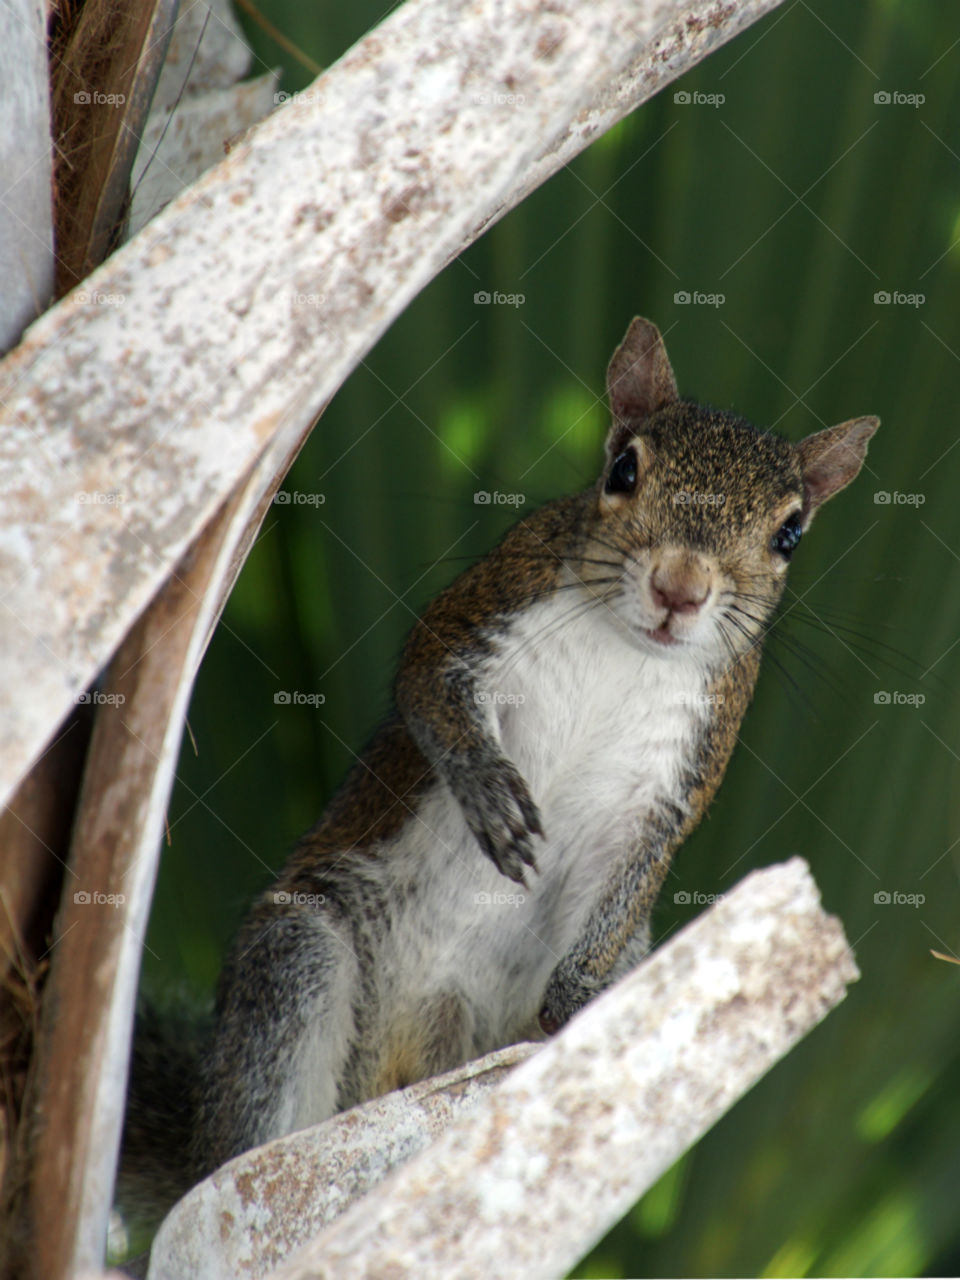 Standing Staring Squirrel. Squirrel standing and staring from perch on Cabbage Palm Tree